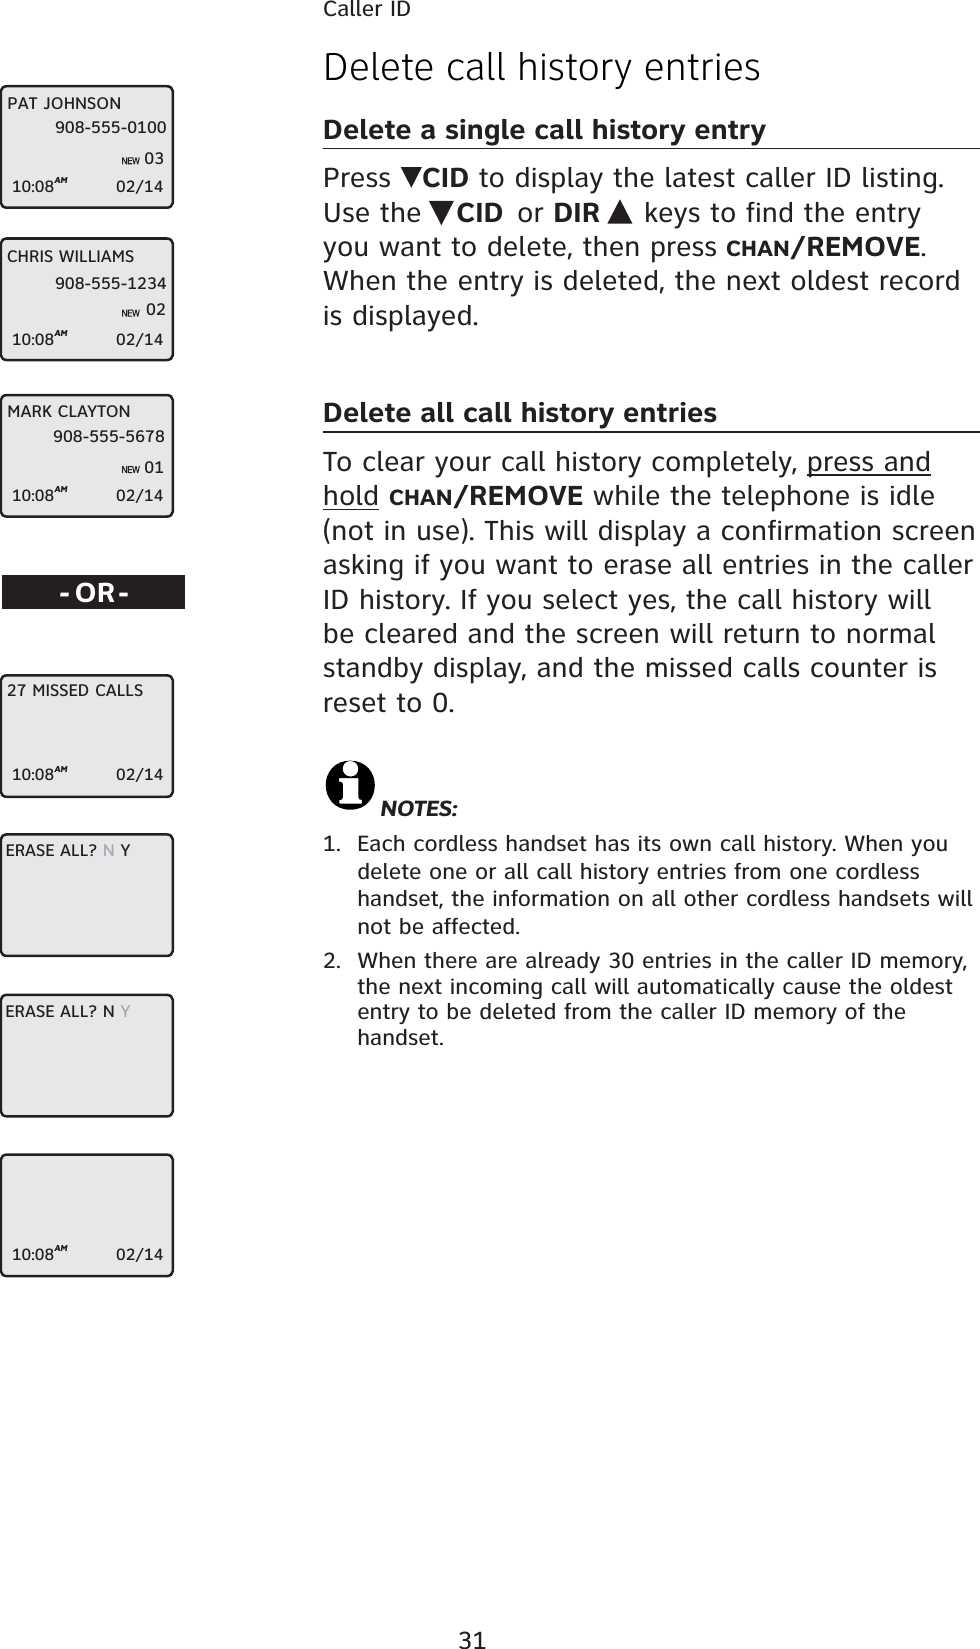 31Caller IDDelete call history entriesDelete a single call history entryPress  CID to display the latest caller ID listing. Use the  CID or DIR  keys to find the entry you want to delete, then press CHAN/REMOVE. When the entry is deleted, the next oldest record is displayed.Delete all call history entriesTo clear your call history completely, press and hold CHAN/REMOVE while the telephone is idle (not in use). This will display a confirmation screen asking if you want to erase all entries in the caller ID history. If you select yes, the call history will be cleared and the screen will return to normal standby display, and the missed calls counter is reset to 0.NOTES:1.  Each cordless handset has its own call history. When you delete one or all call history entries from one cordless handset, the information on all other cordless handsets will not be affected.2.  When there are already 30 entries in the caller ID memory, the next incoming call will automatically cause the oldest entry to be deleted from the caller ID memory of the handset.-OR-MARK CLAYTON10:08AM                   02/14908-555-567801CHRIS WILLIAMS10:08AM                   02/14908-555-123402PAT JOHNSON10:08AM                   02/14908-555-01000327 MISSED CALLS10:08AM                   02/14ERASE ALL? N YERASE ALL? N Y10:08AM                   02/14